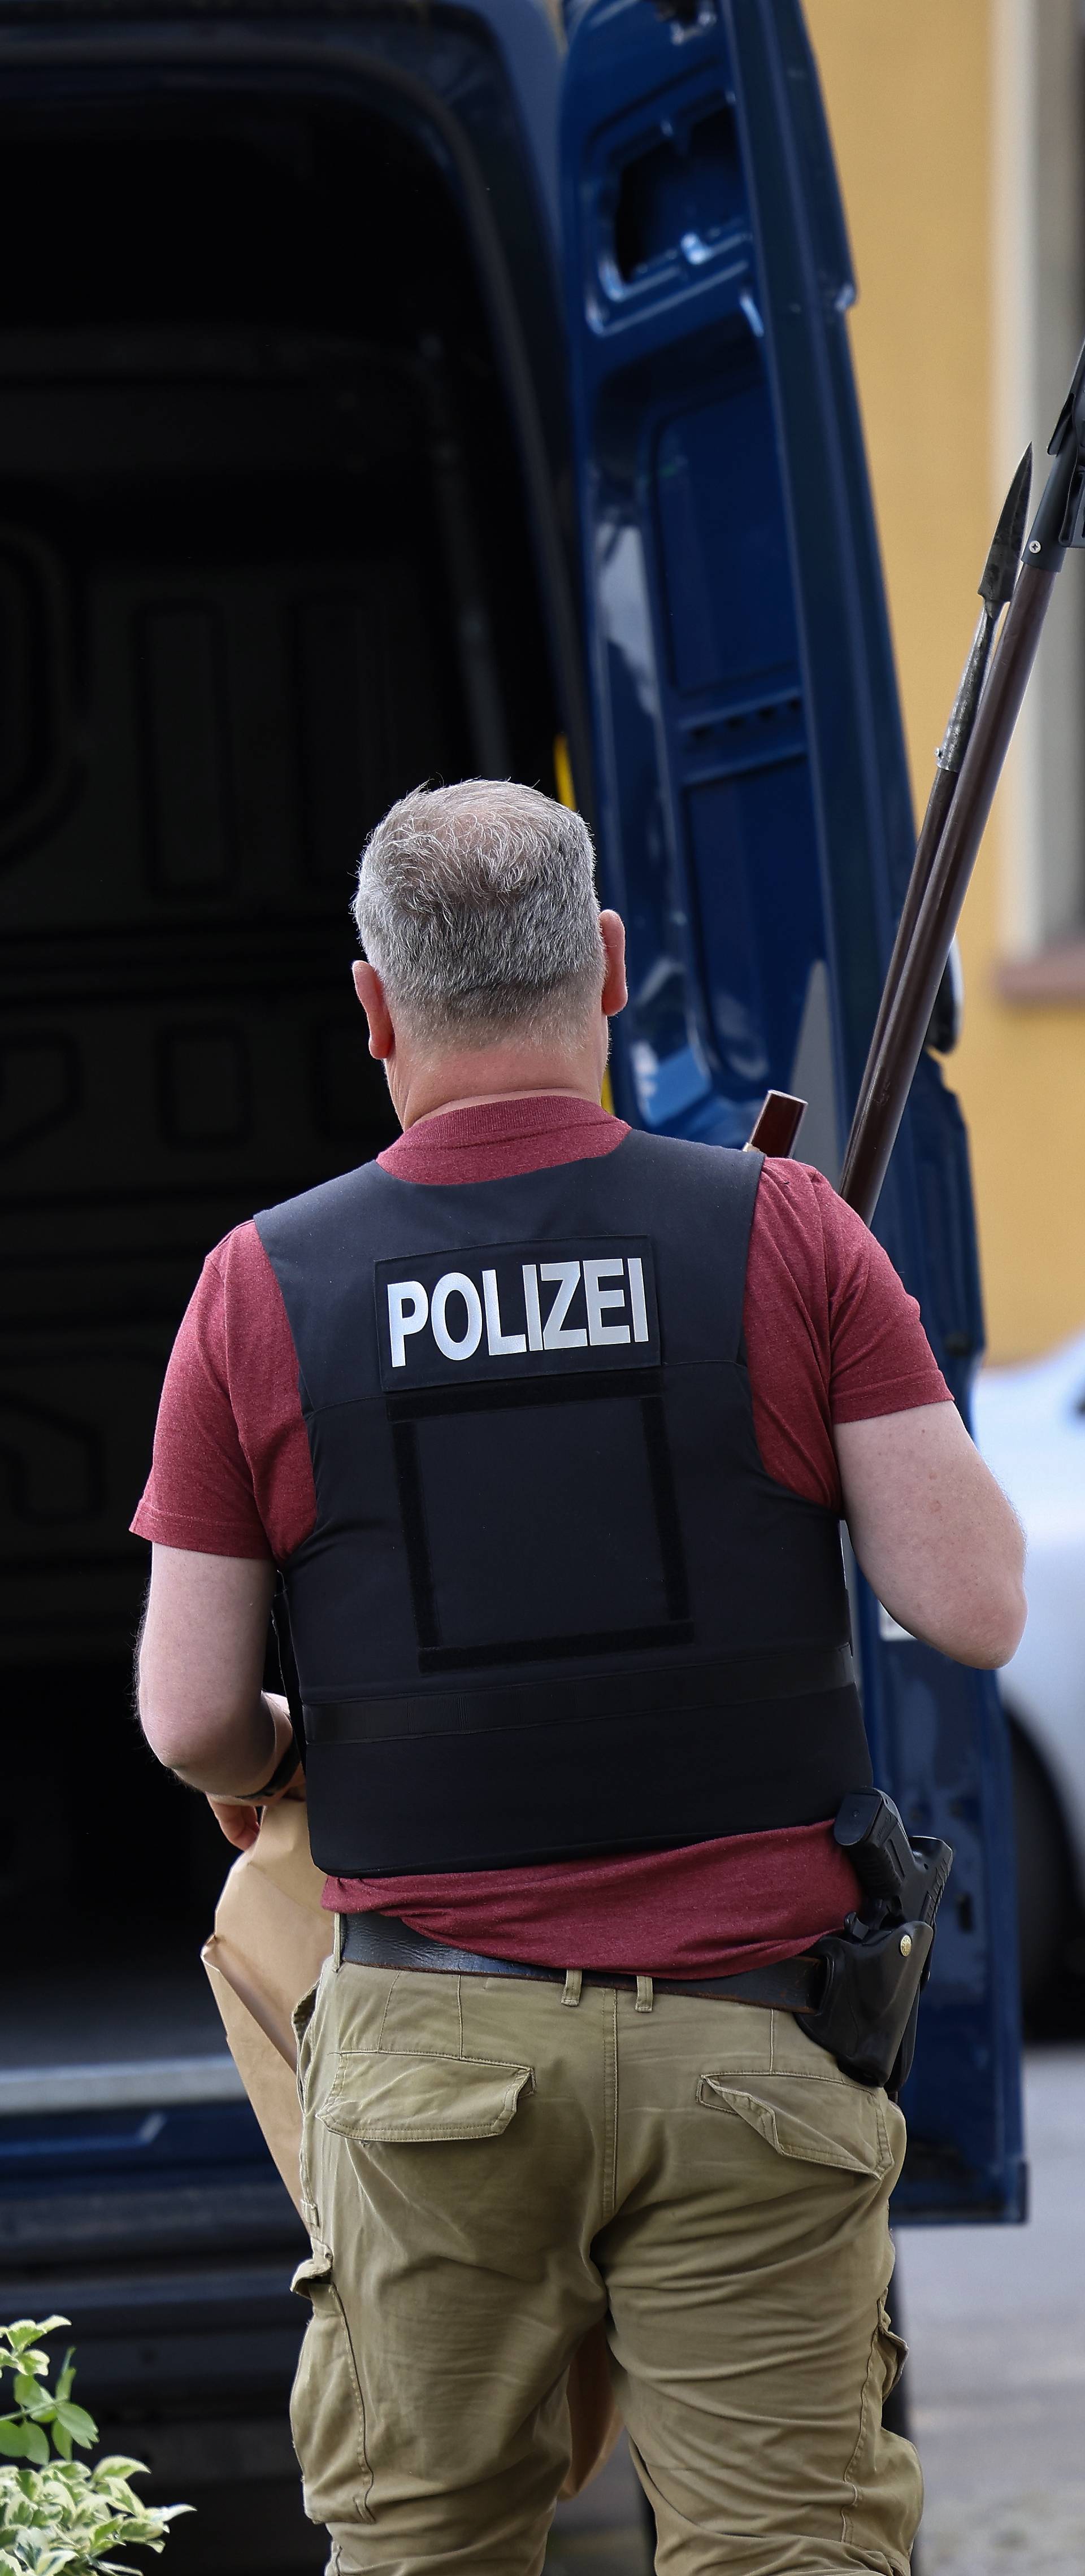 Police action at two schools in Essen